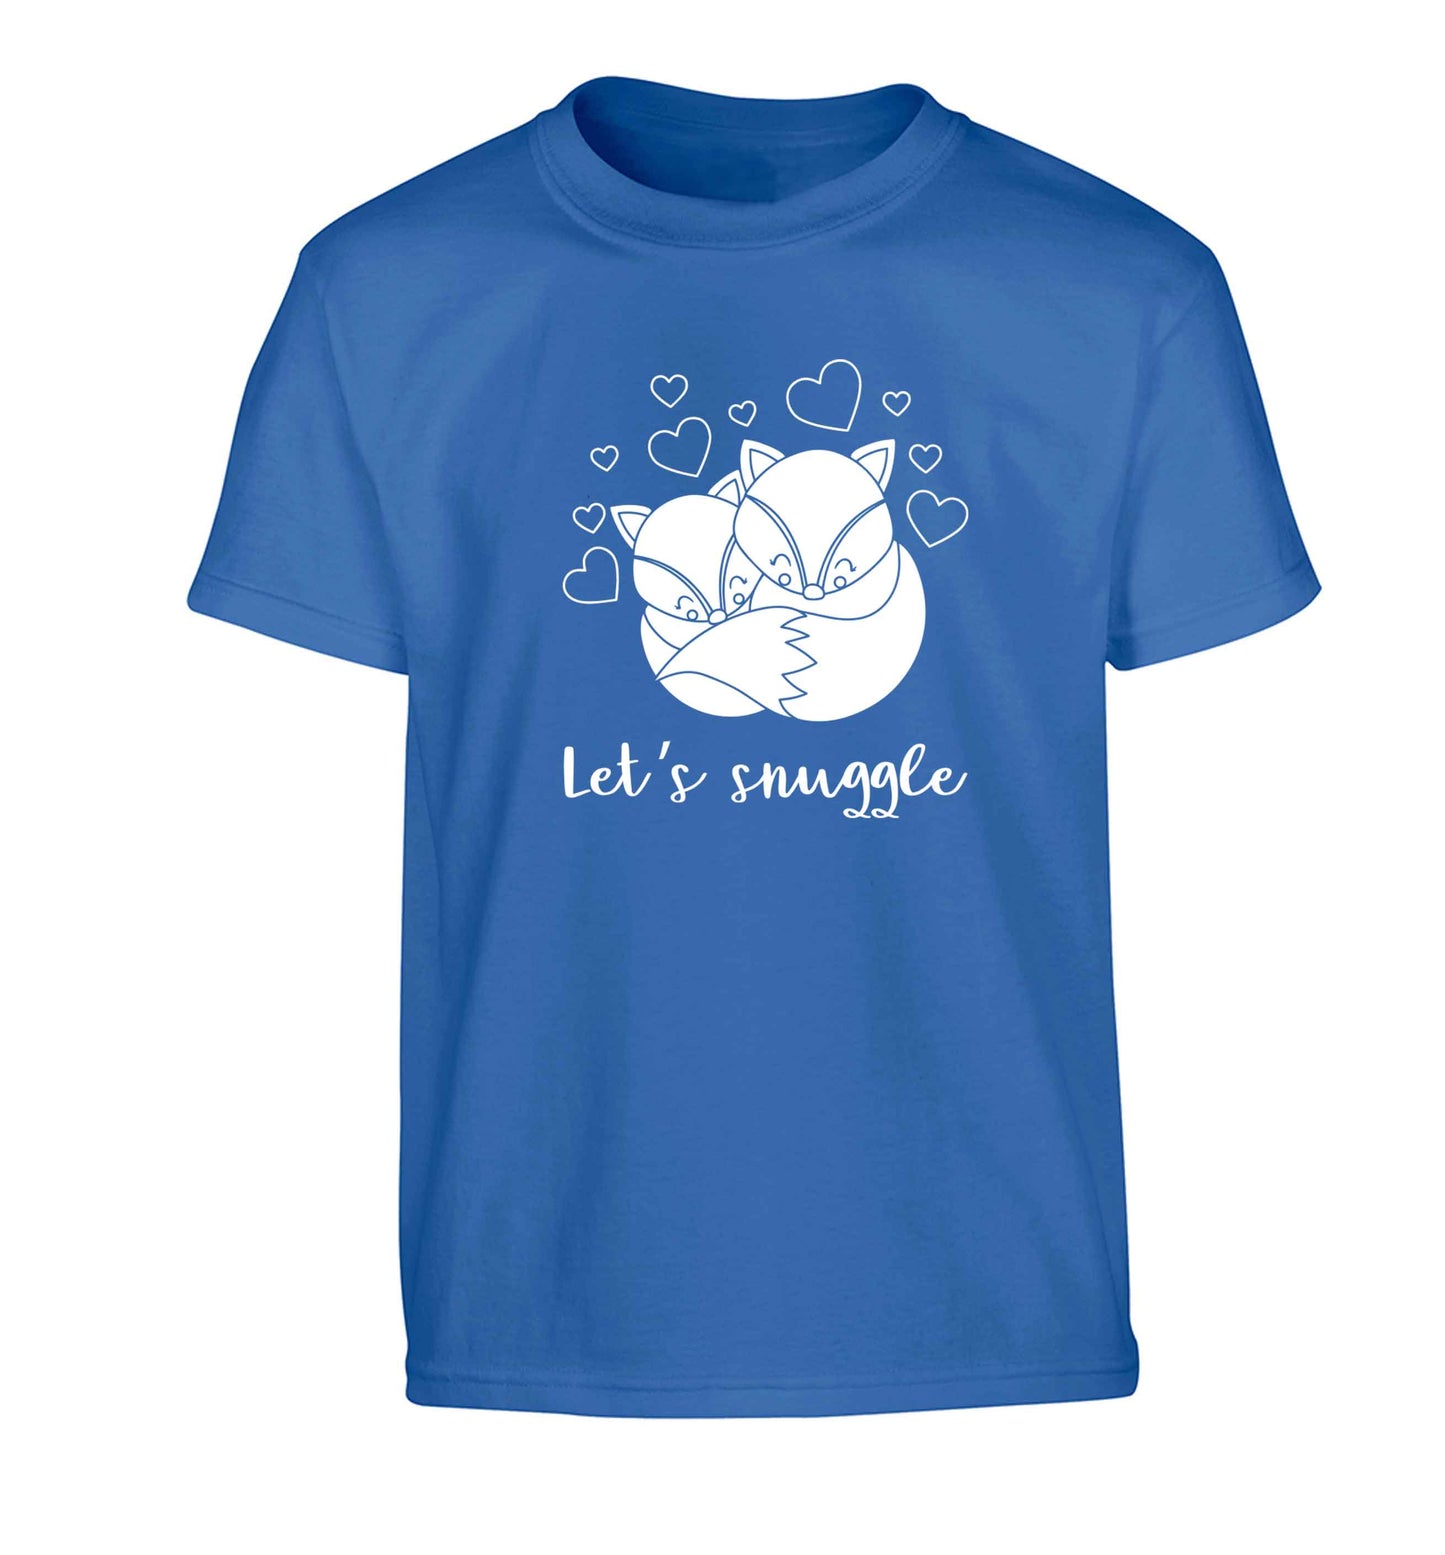 Let's snuggle Children's blue Tshirt 12-13 Years